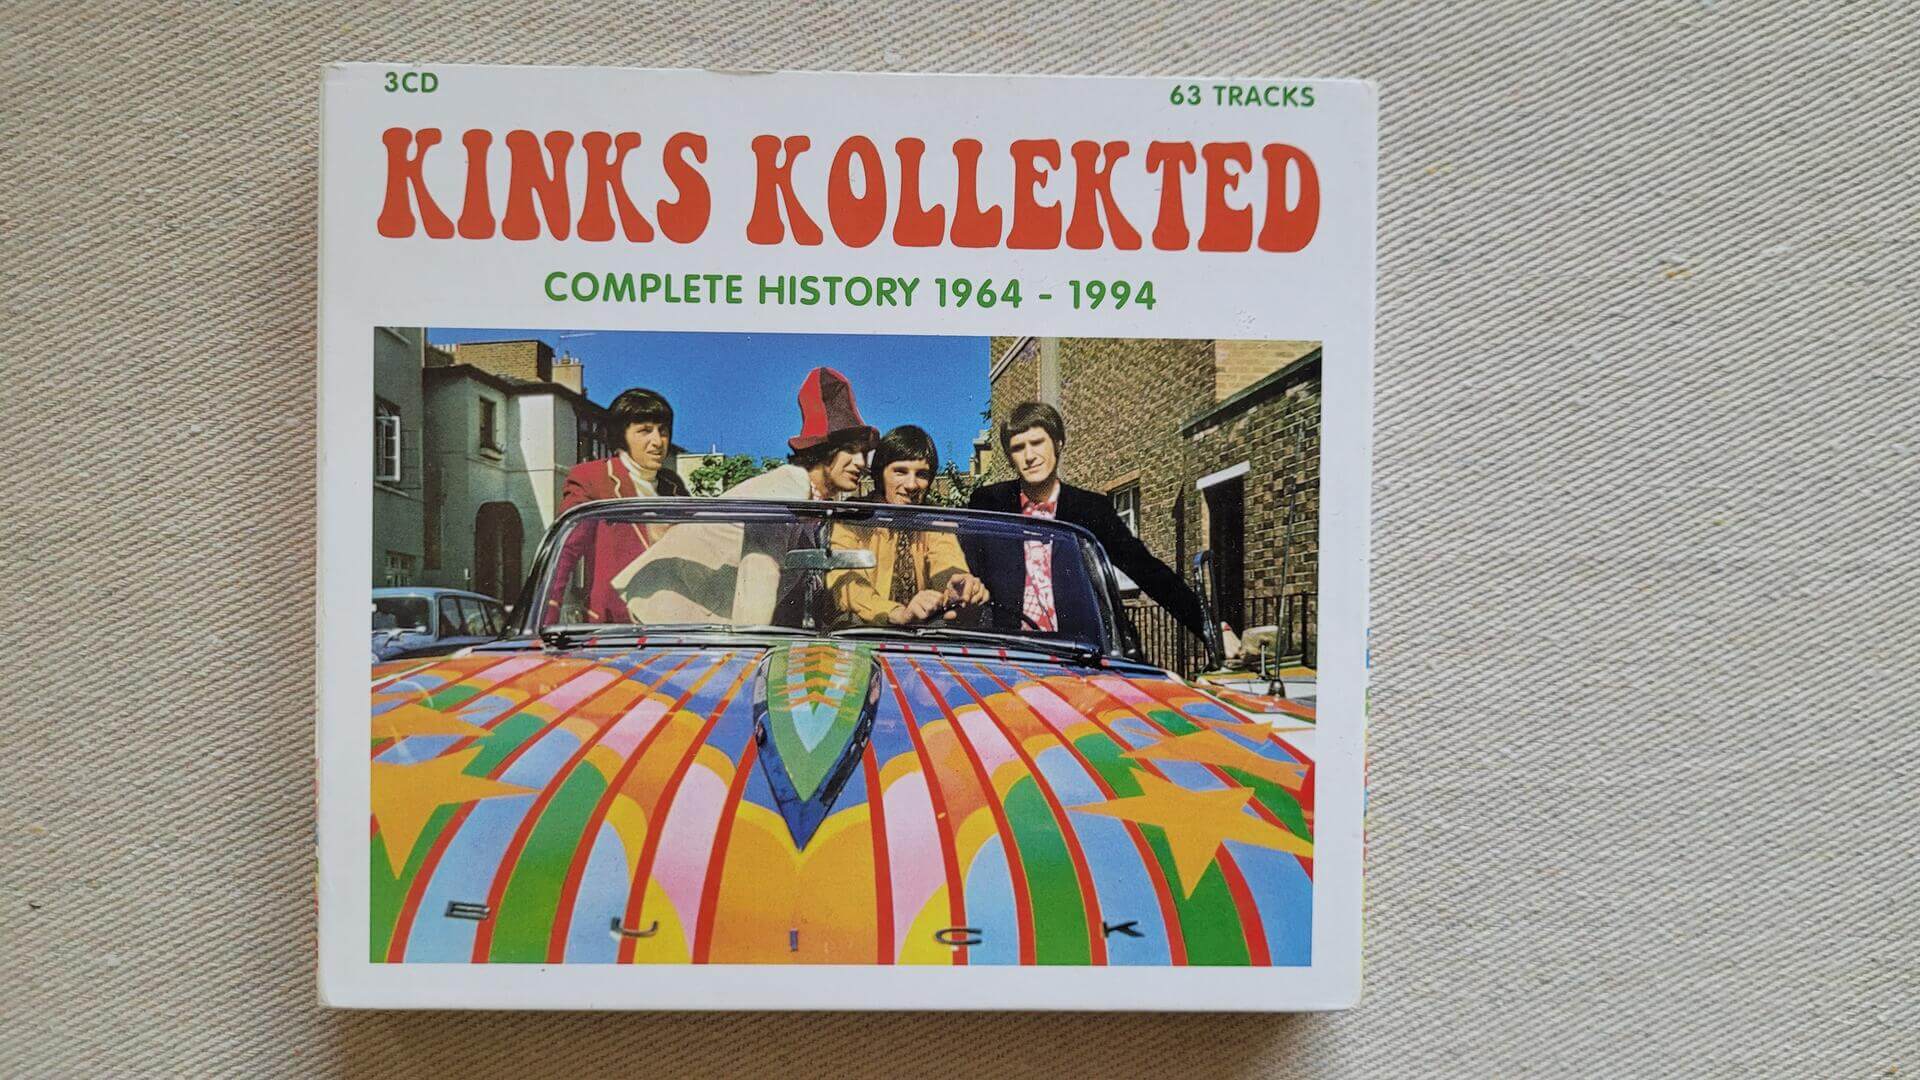 3 CD set Kinks Kollekted: Complete History 1964-1994 by English rock band the Kinks released by Universal Music in 2011. Vintage collectible Rock British Invasion Rock music by the Kinks